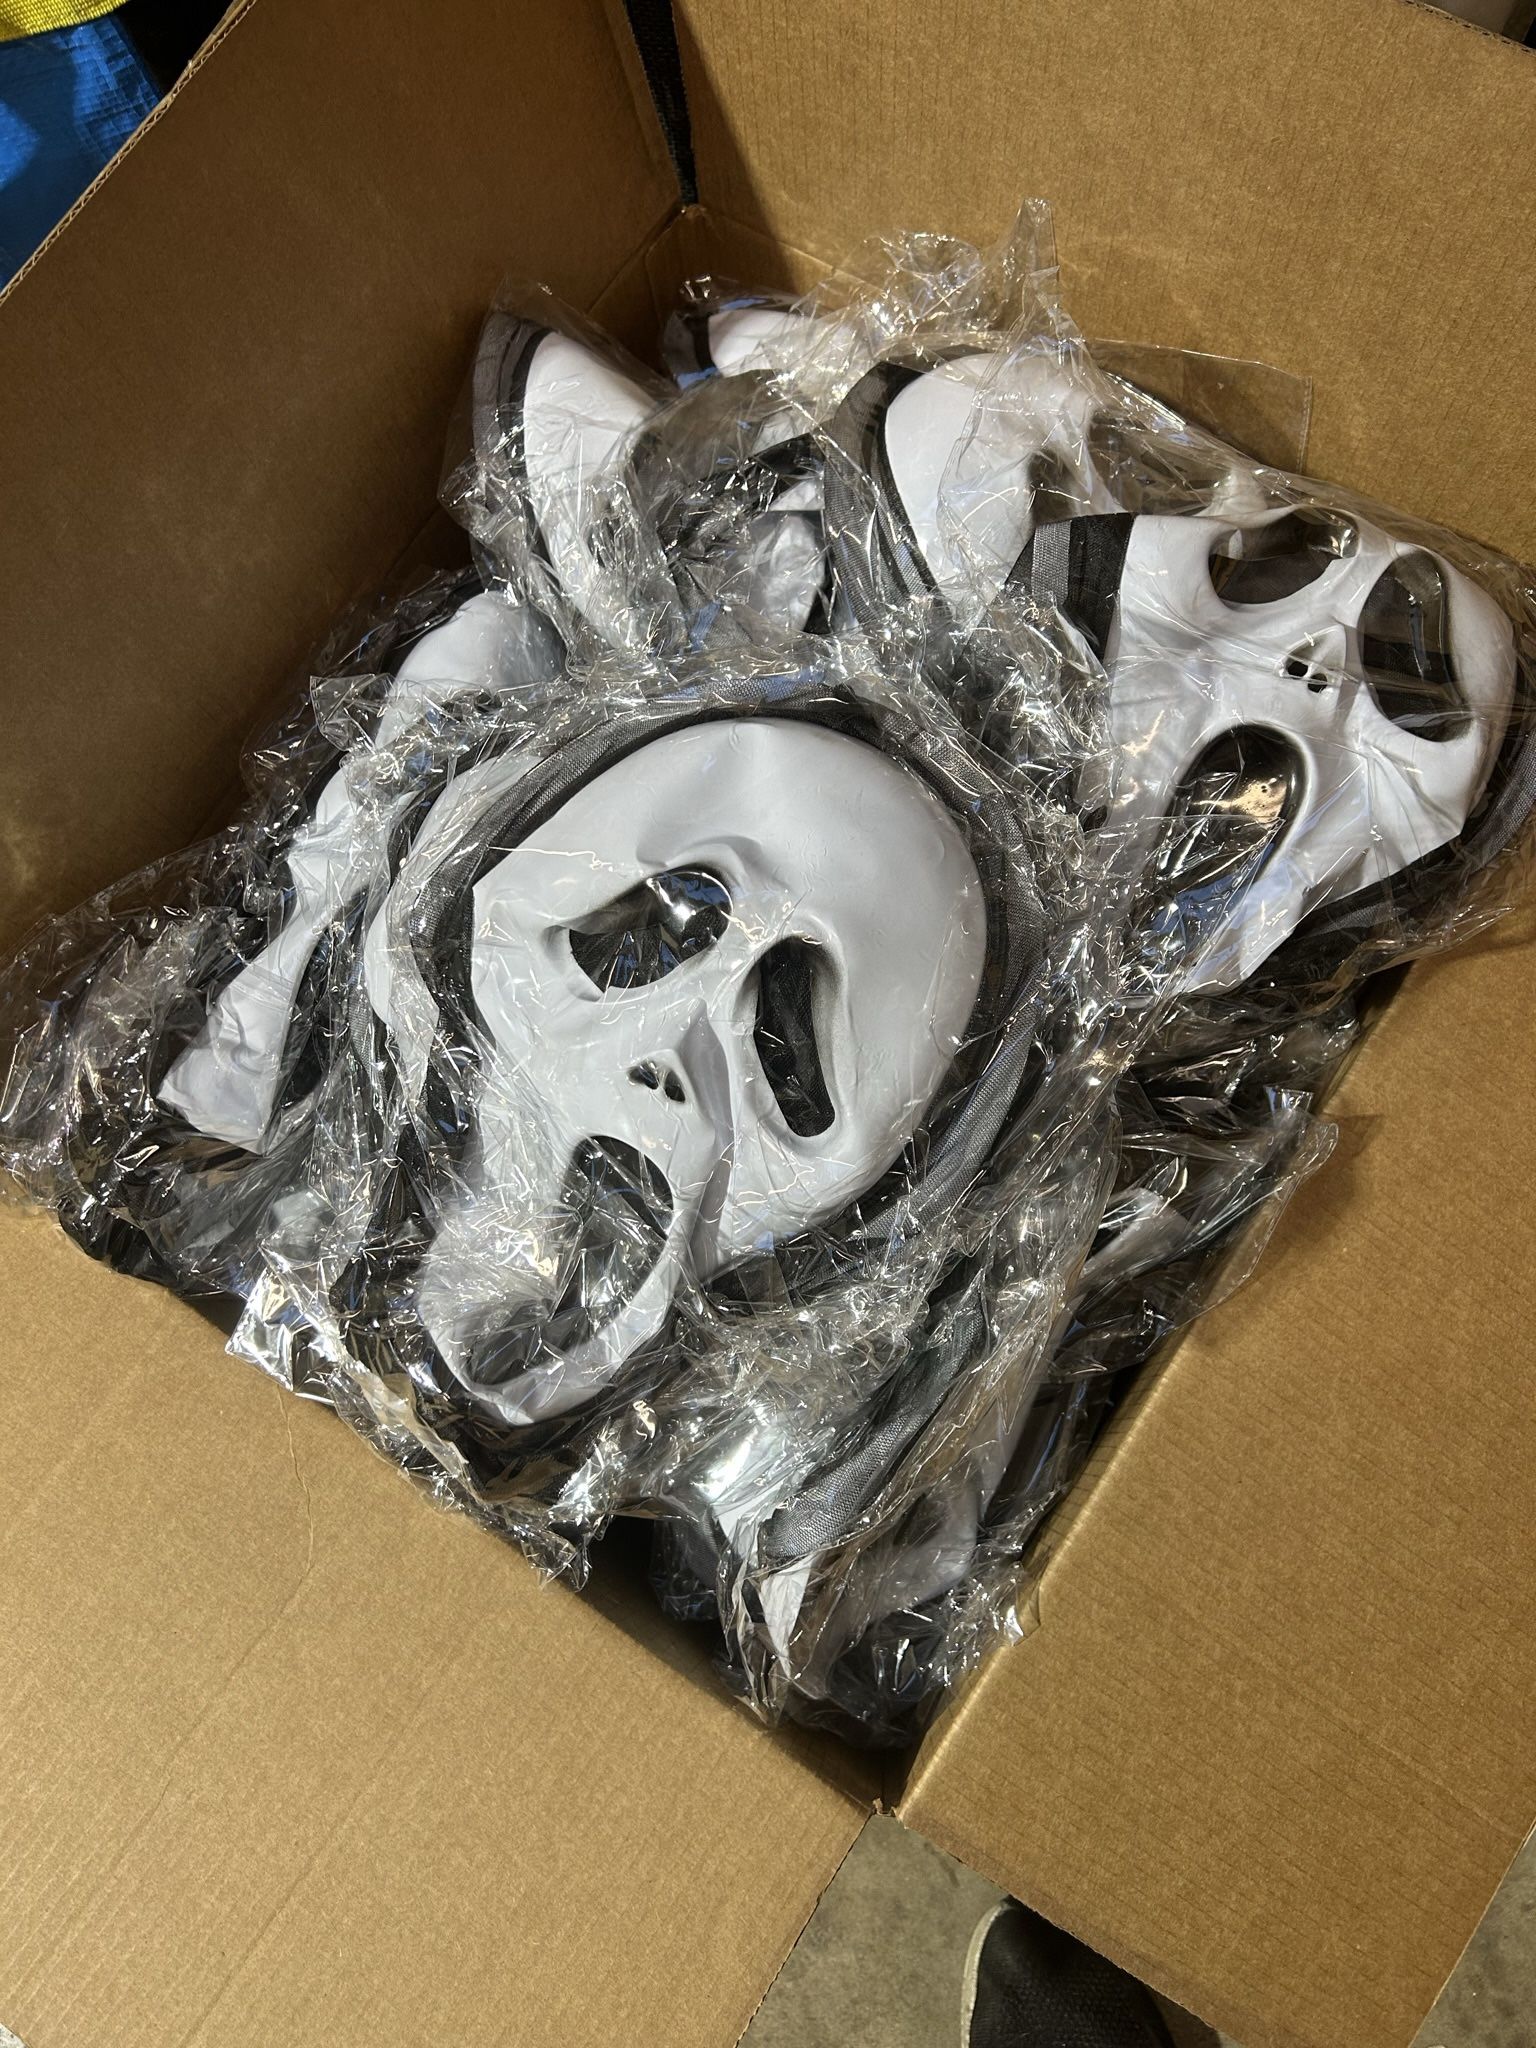 50pc Ghost Mask For Decorating Halloween Costume 